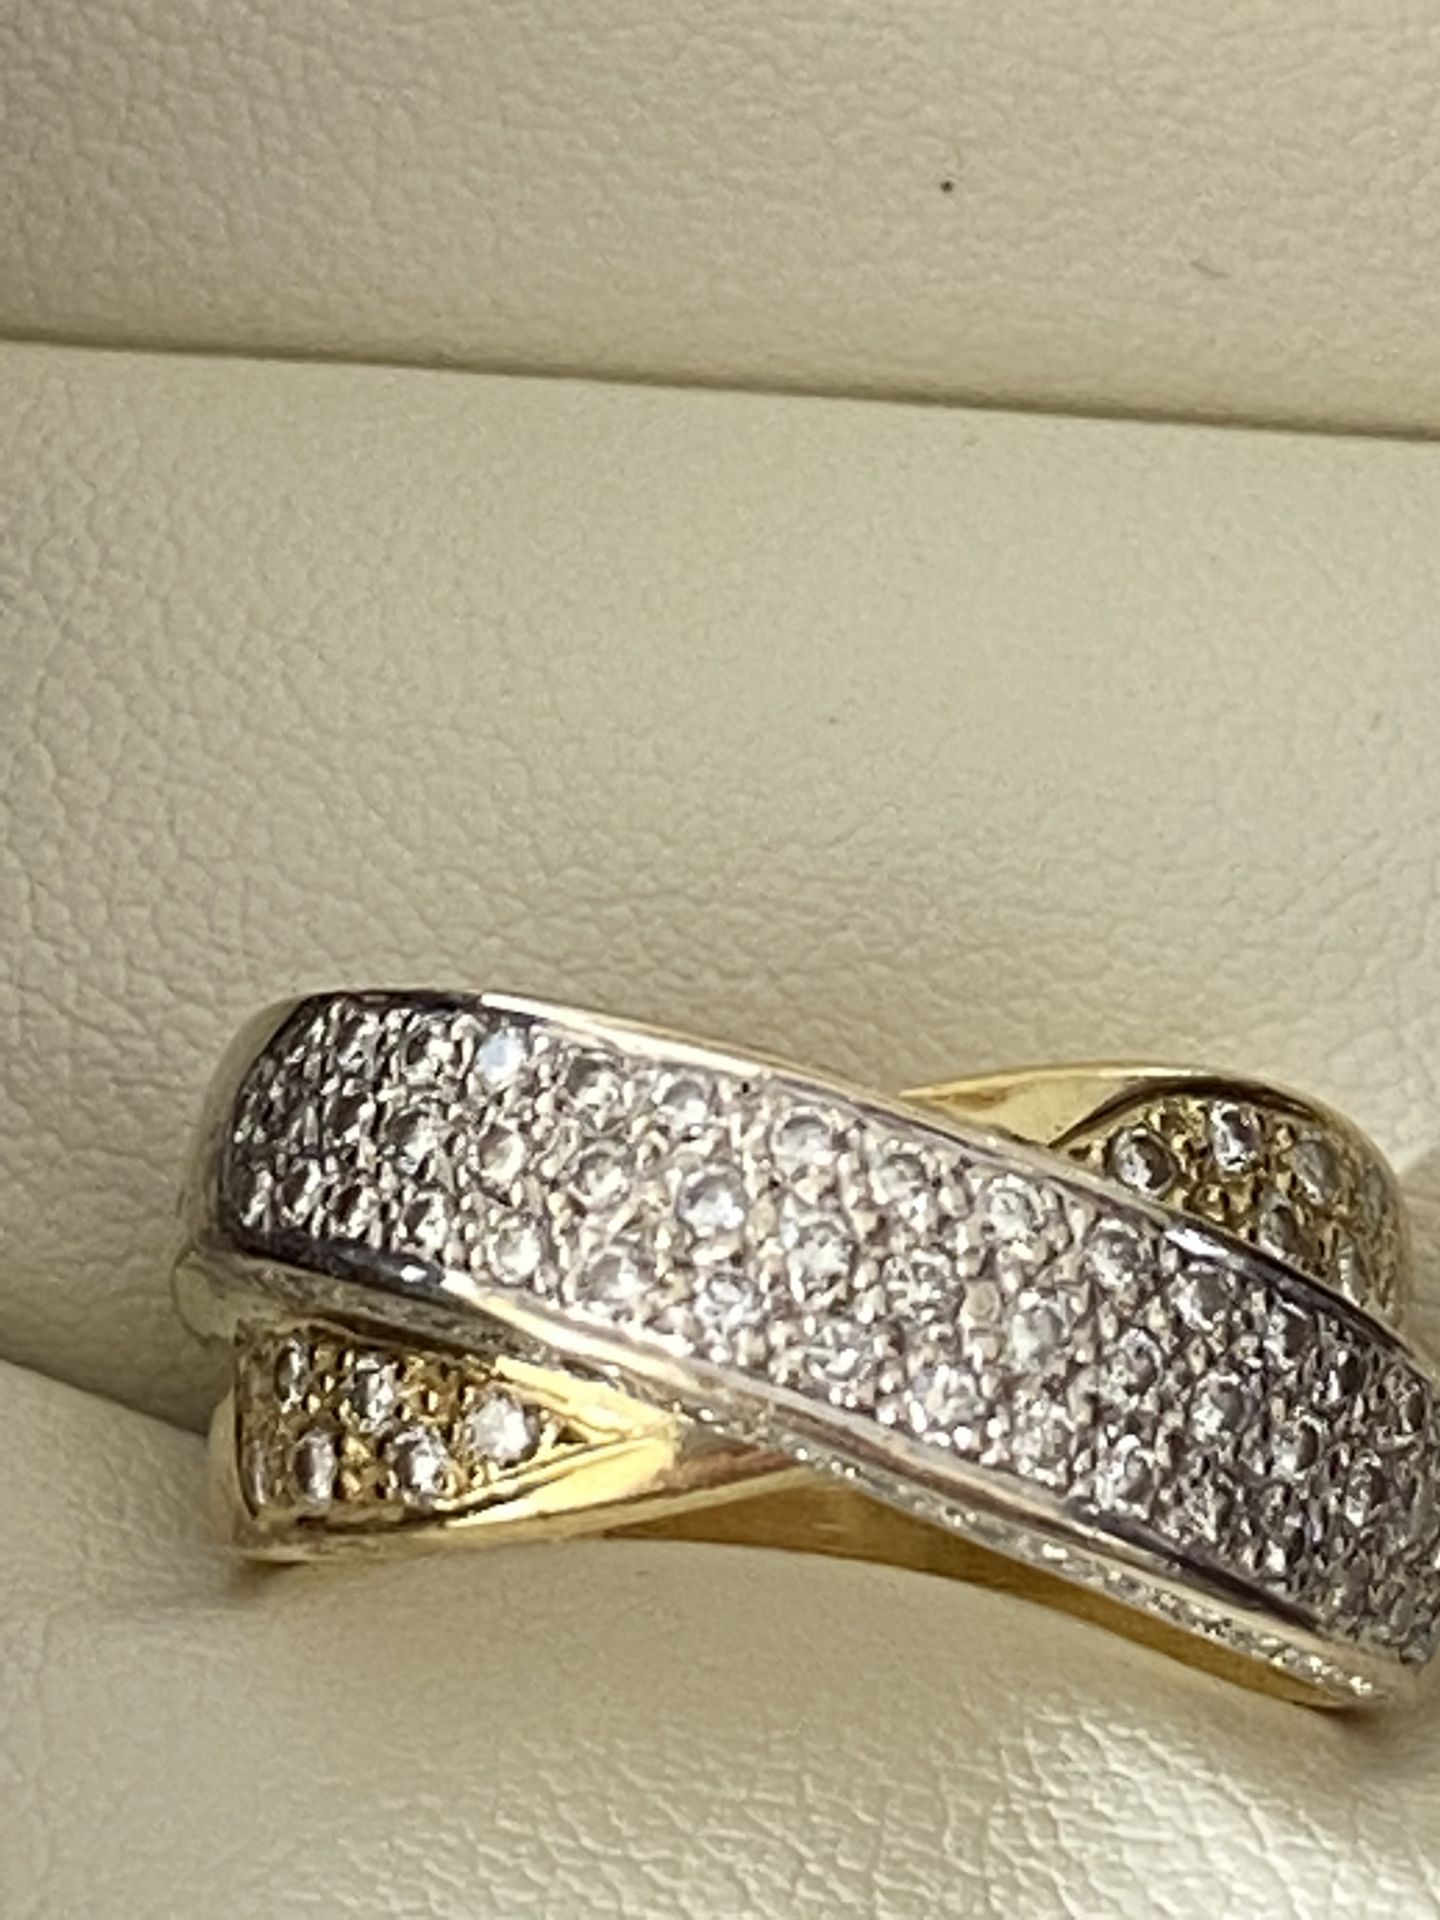 18ct GOLD 1.00ct DIAMOND CROSSOVER RING - Image 3 of 5